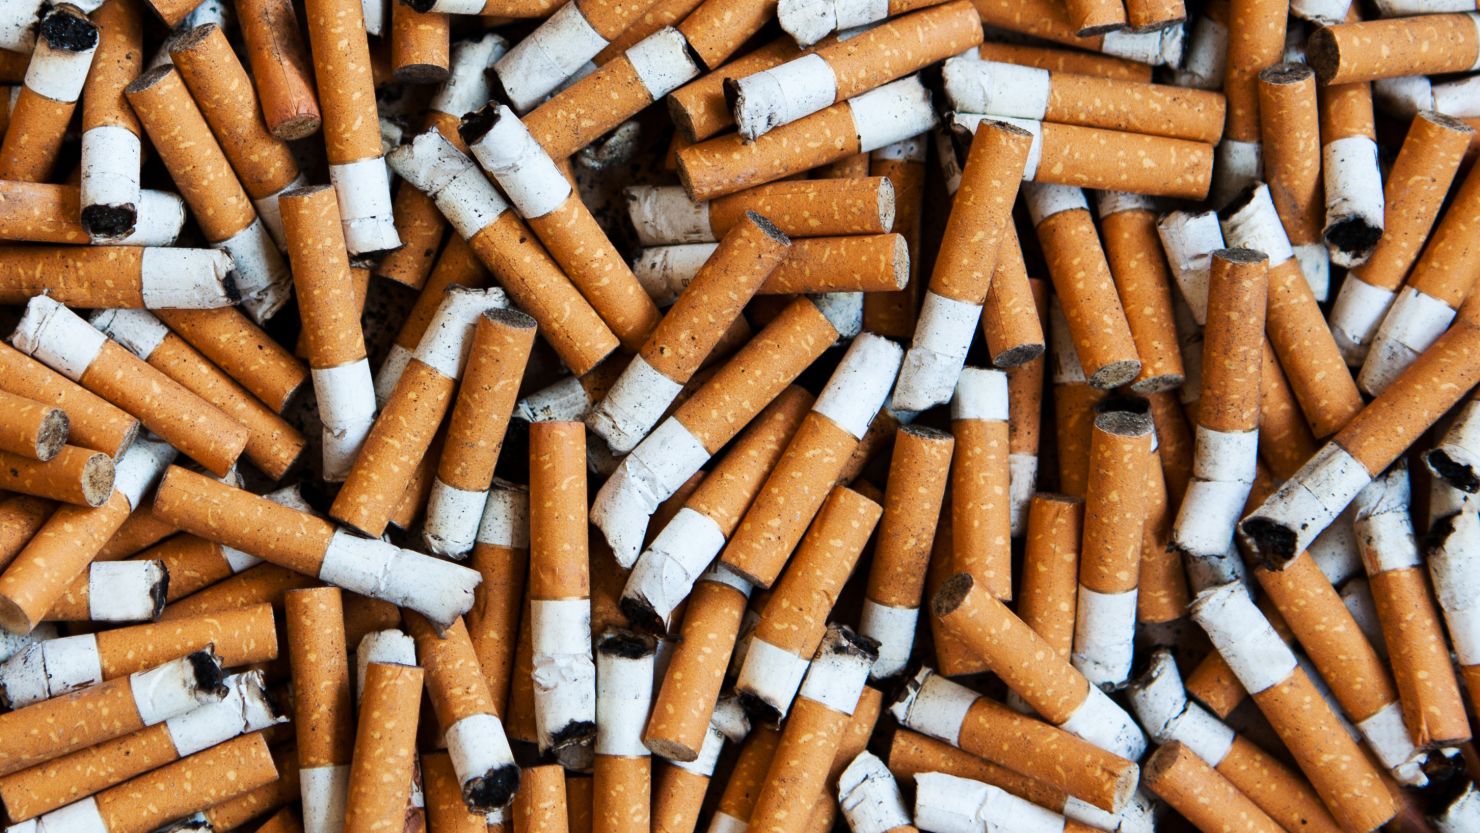 Selling or giving cigarettes or other tobacco products to anyone younger than 21 will be against the law in New Jersey starting November 1.